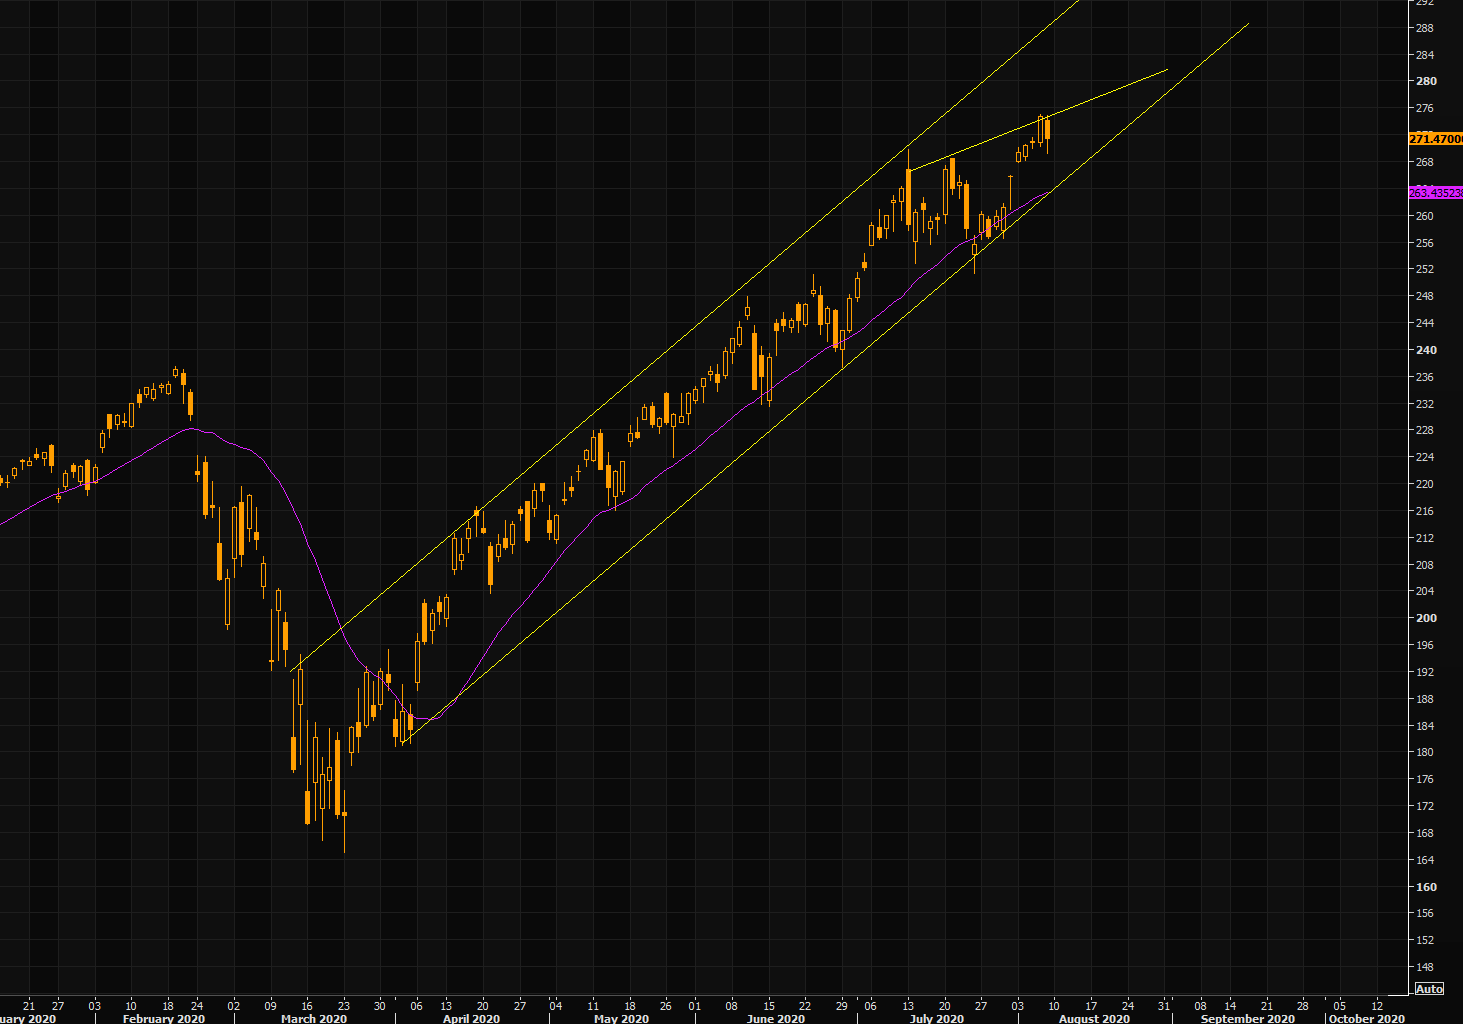 QQQ - trend channel remains intact, but is this losing momentum?